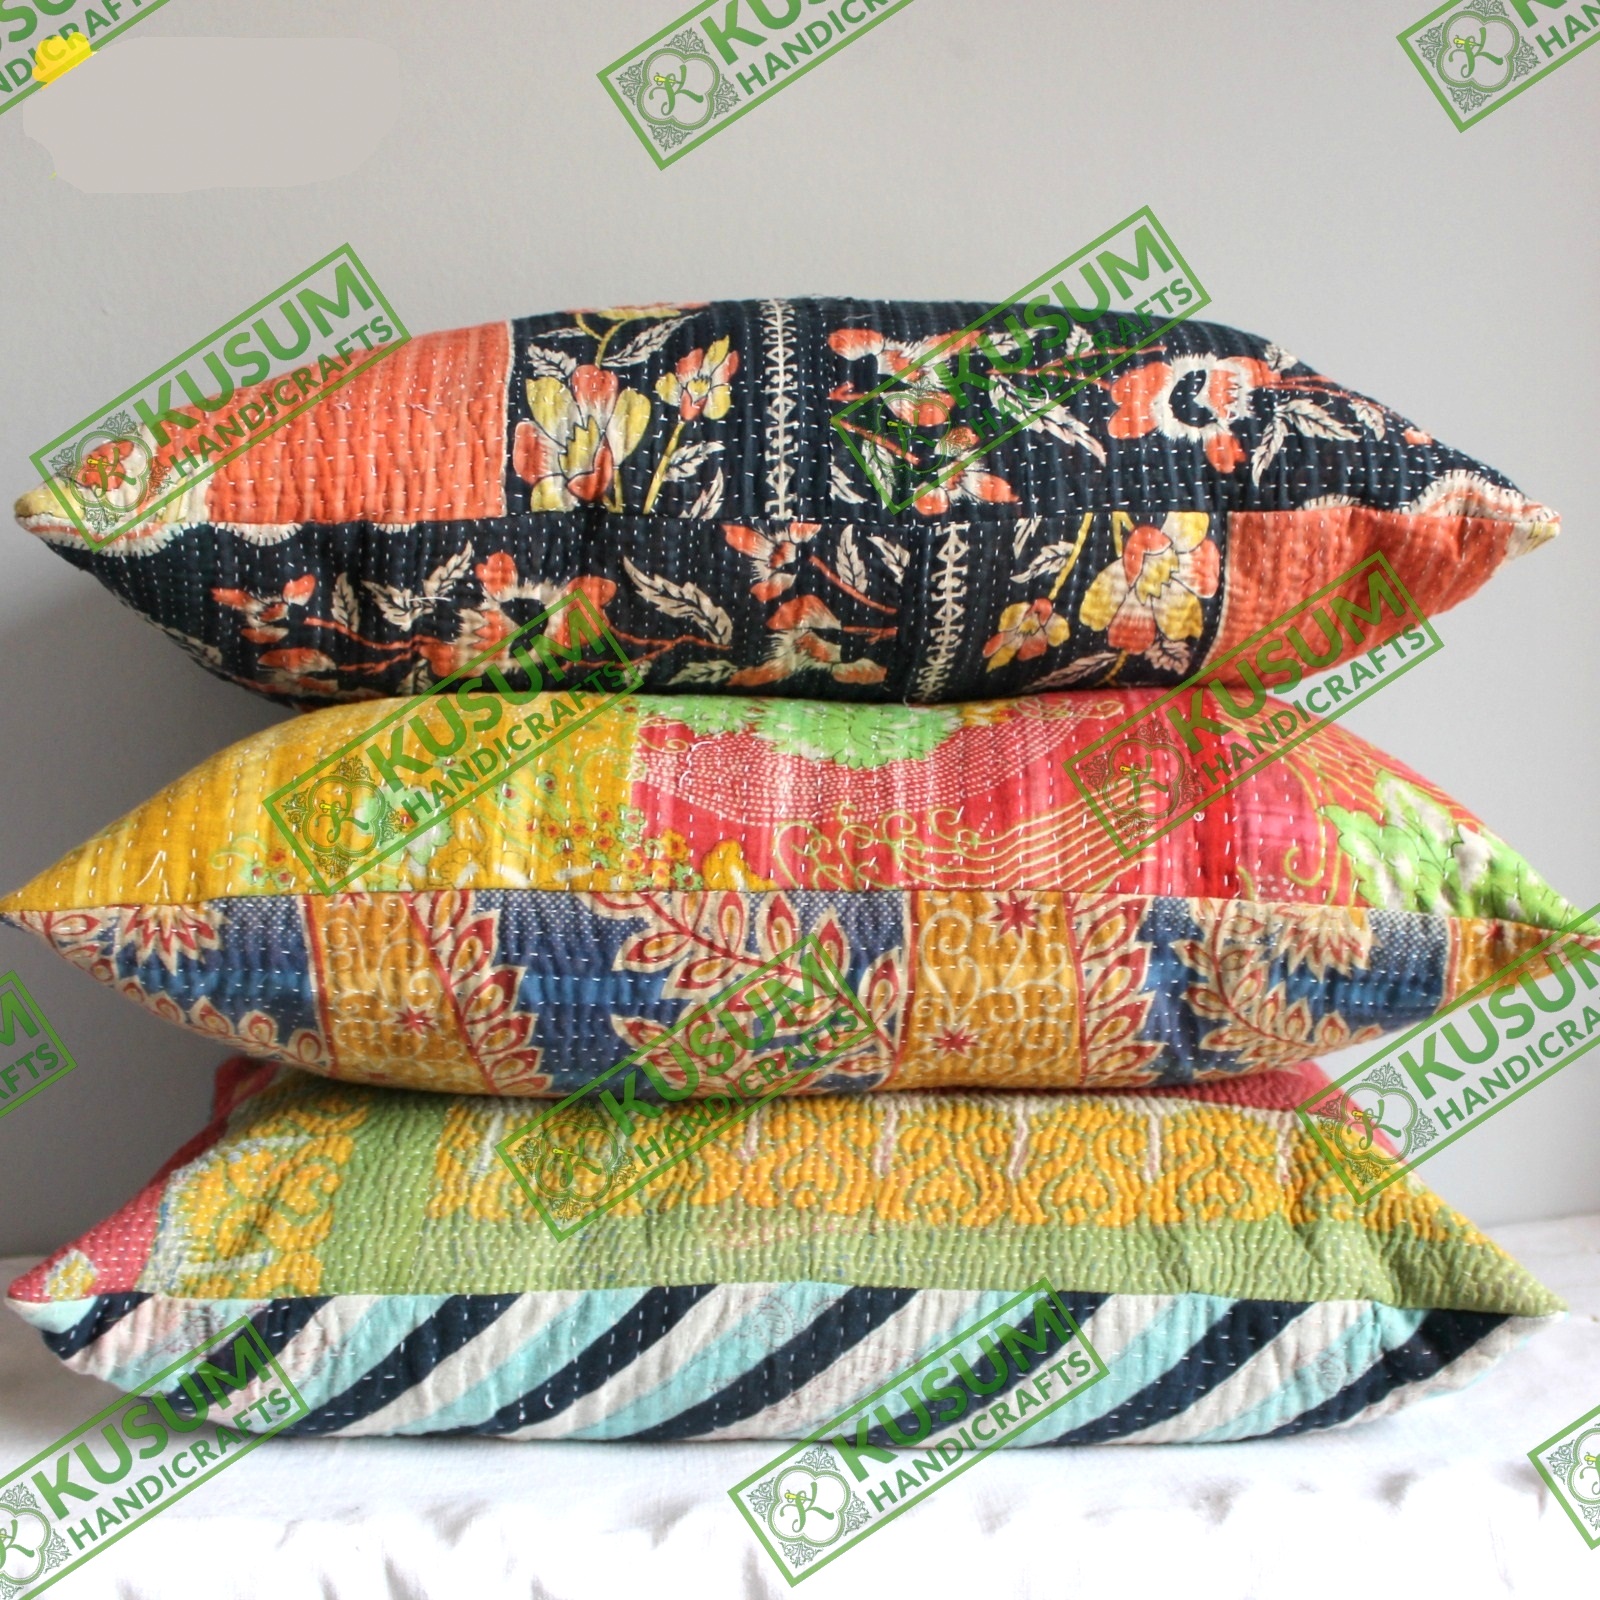 16" INDIAN CUSHION BED PILLOW COVERS THROW Ethnic Vintage Kantha Decor